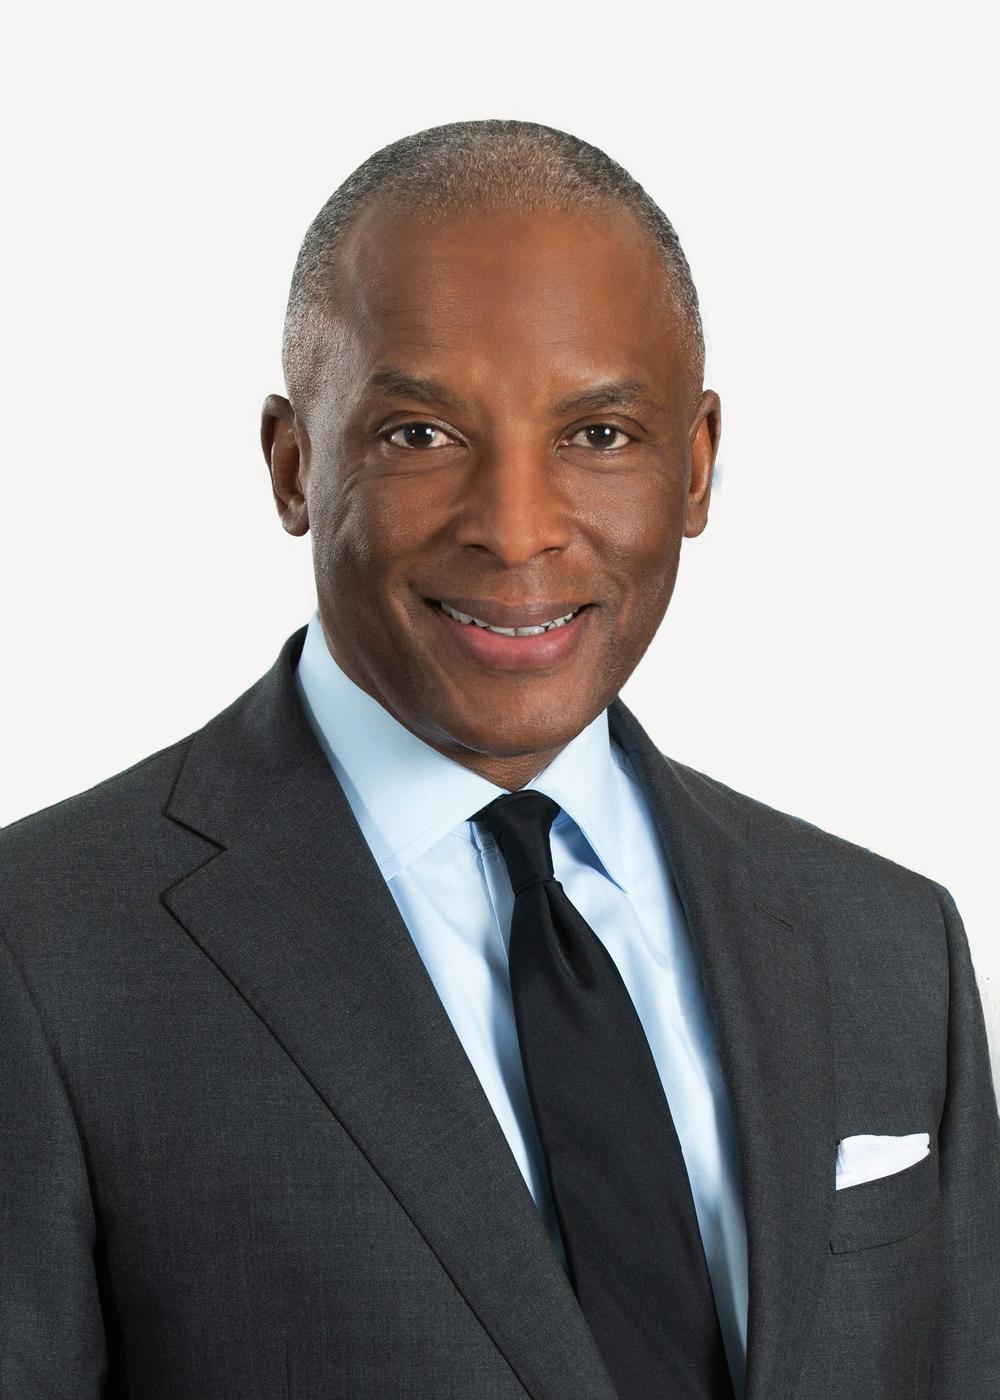 A headshot of Georgia Power President and CEO Chris Womack, soon to be President and CEO of Southern Company.